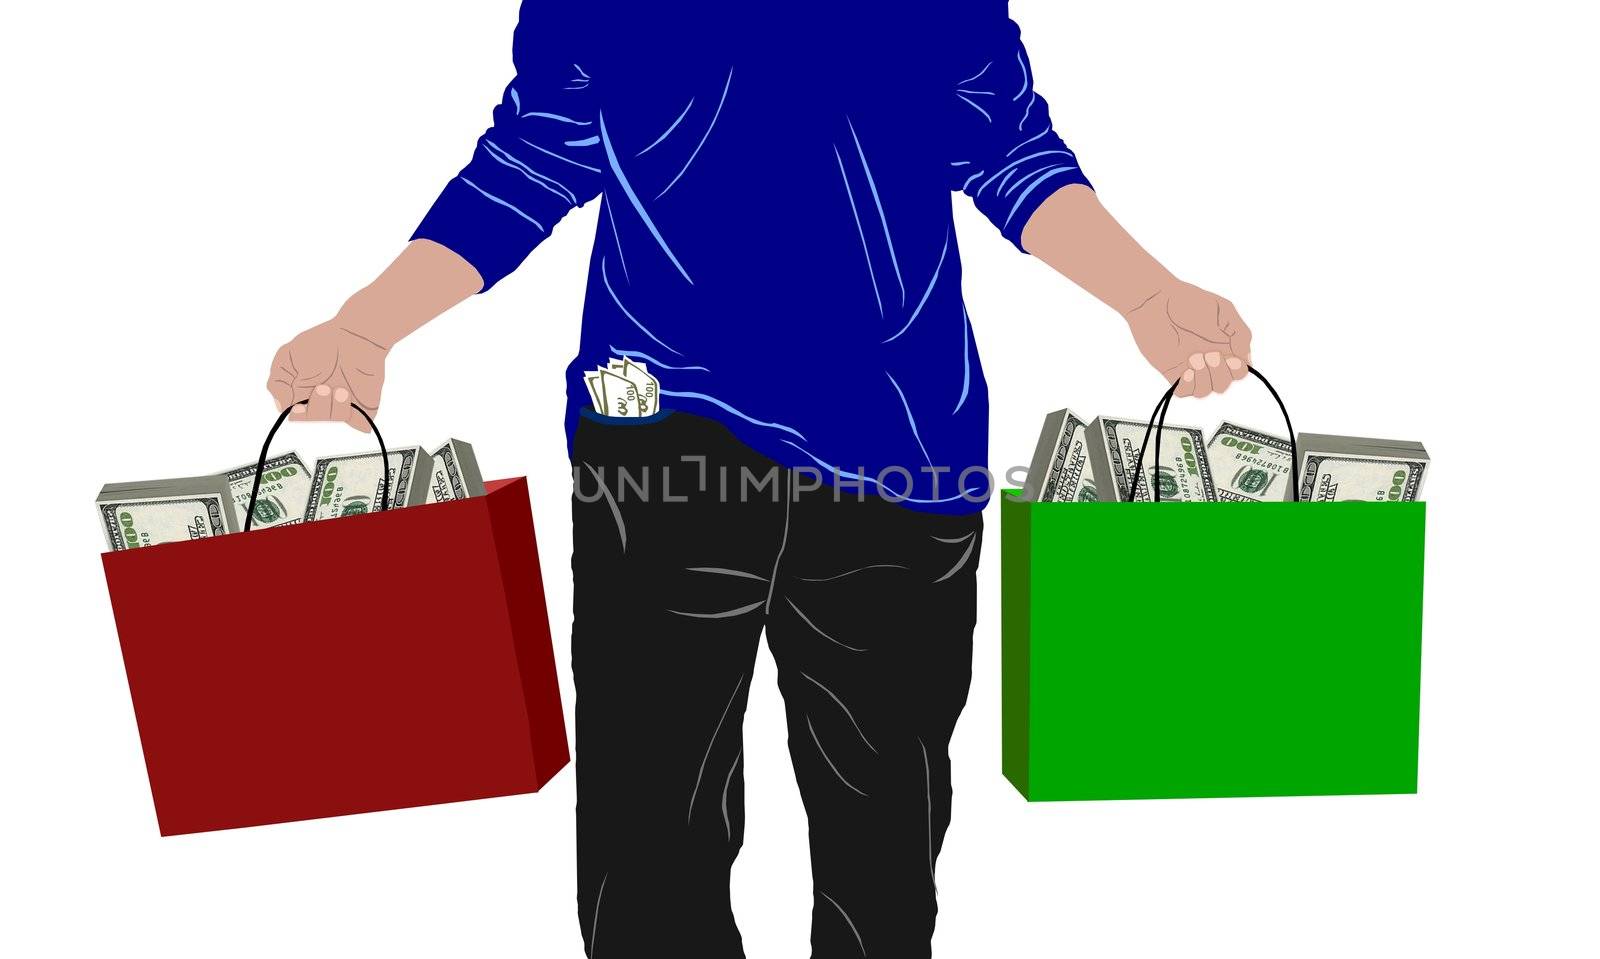 illlustration with money bags by peromarketing